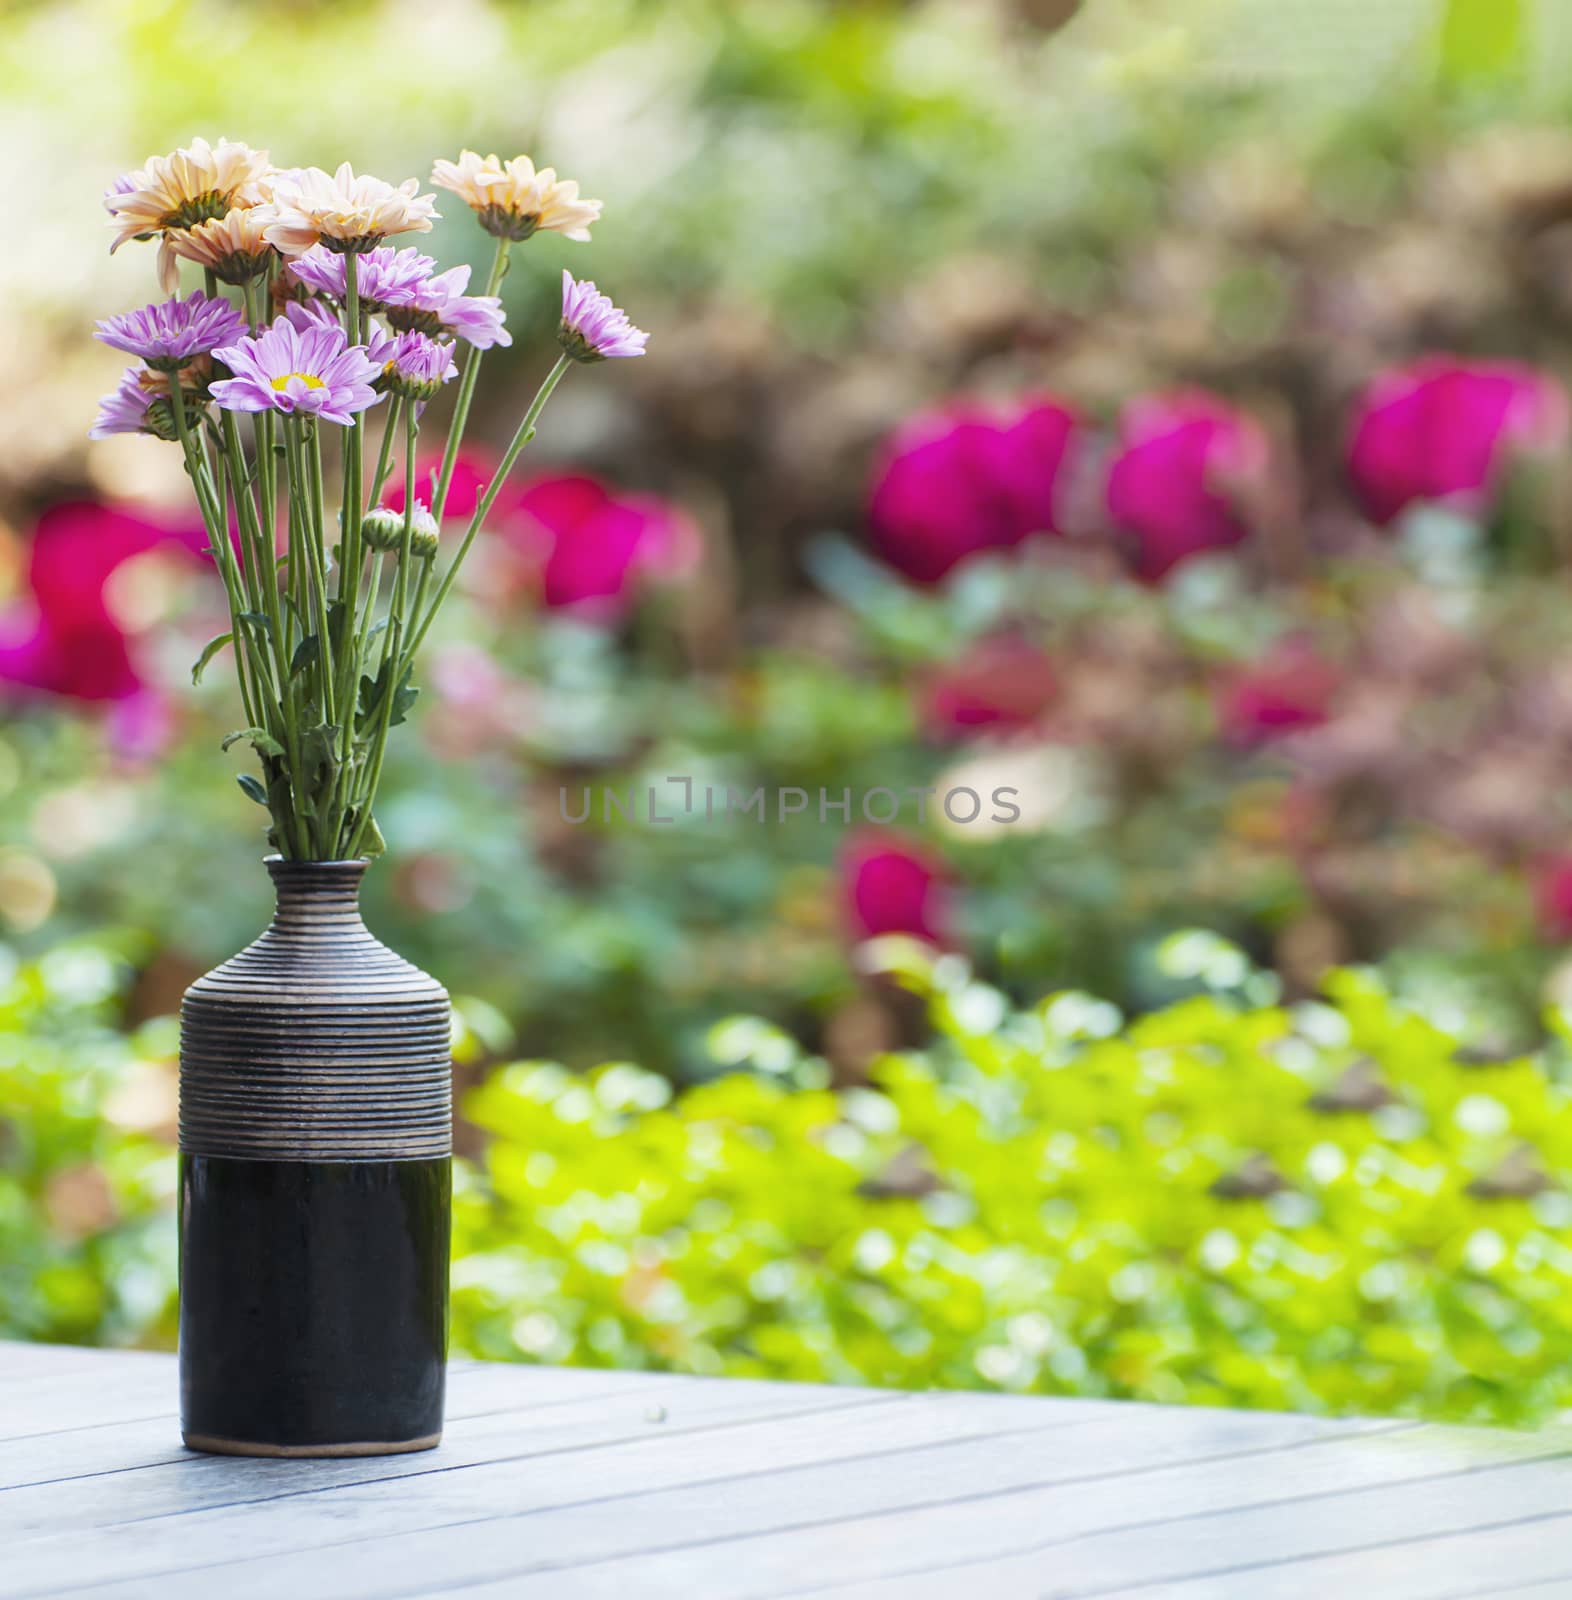 Fresh colorful flower in a small ceramic pot - colorful flower decoration pot for background use concept